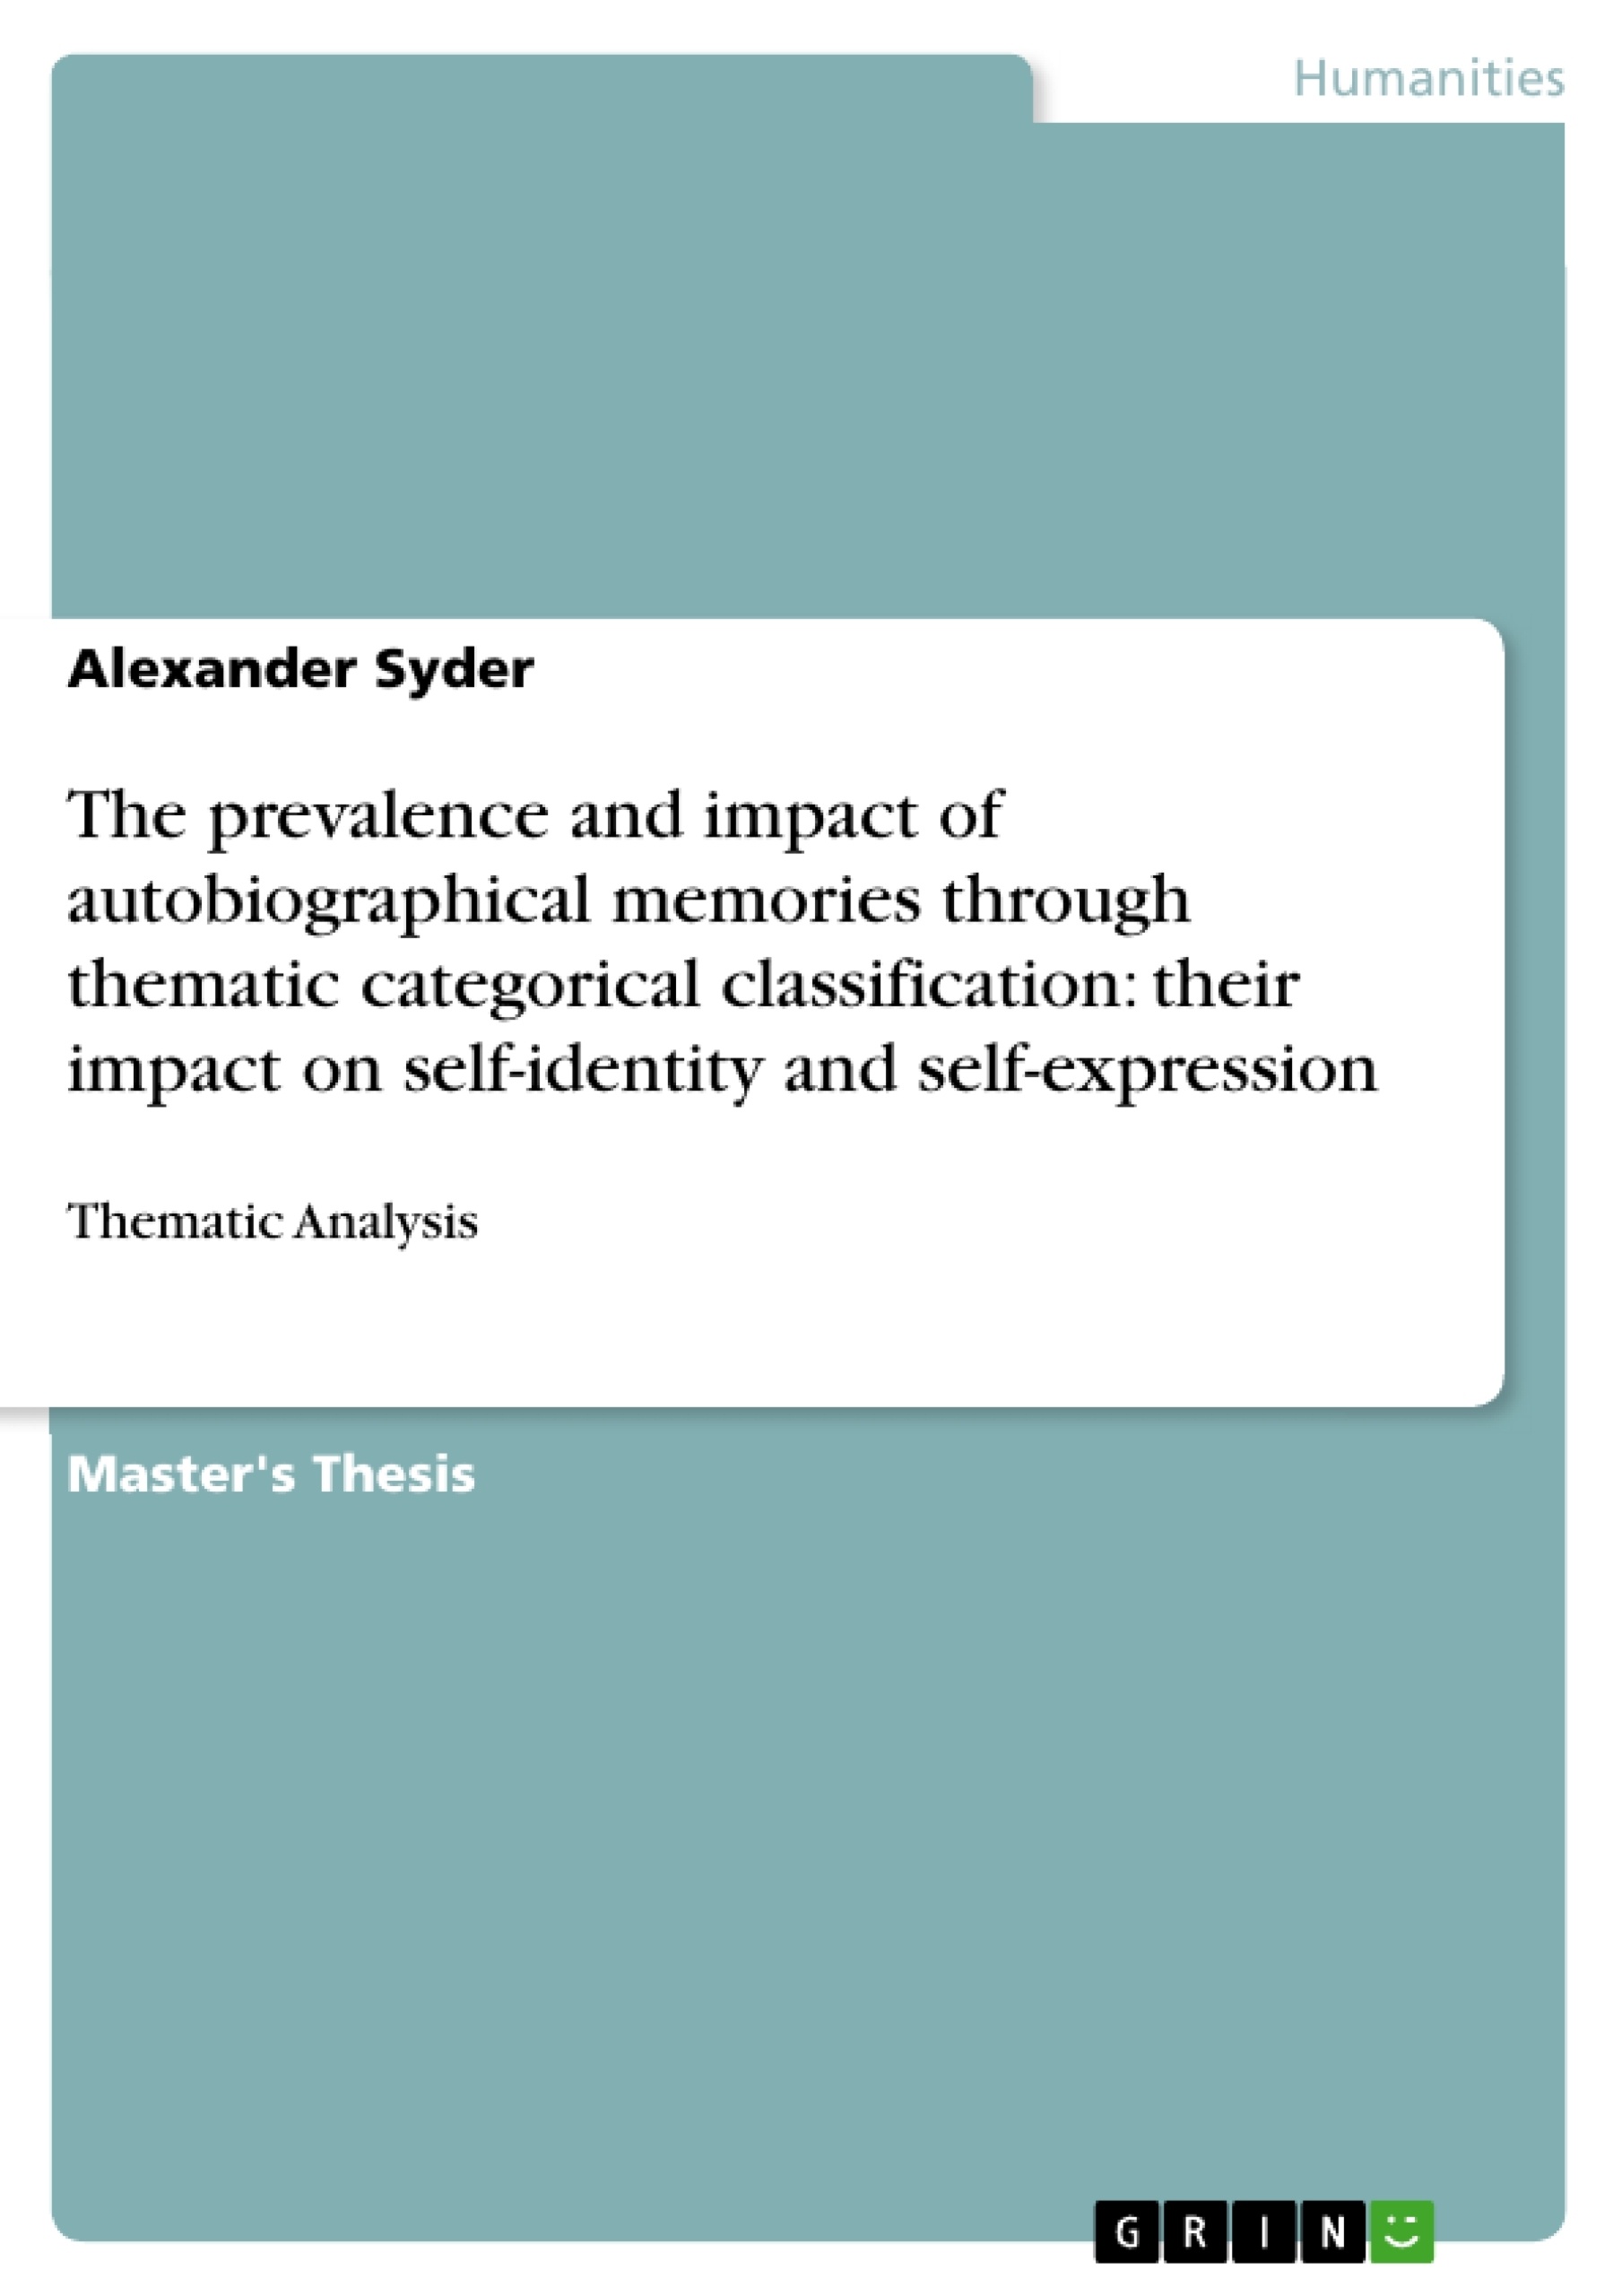 Title: The prevalence and impact of autobiographical memories through thematic categorical classification: their impact on self-identity and self-expression